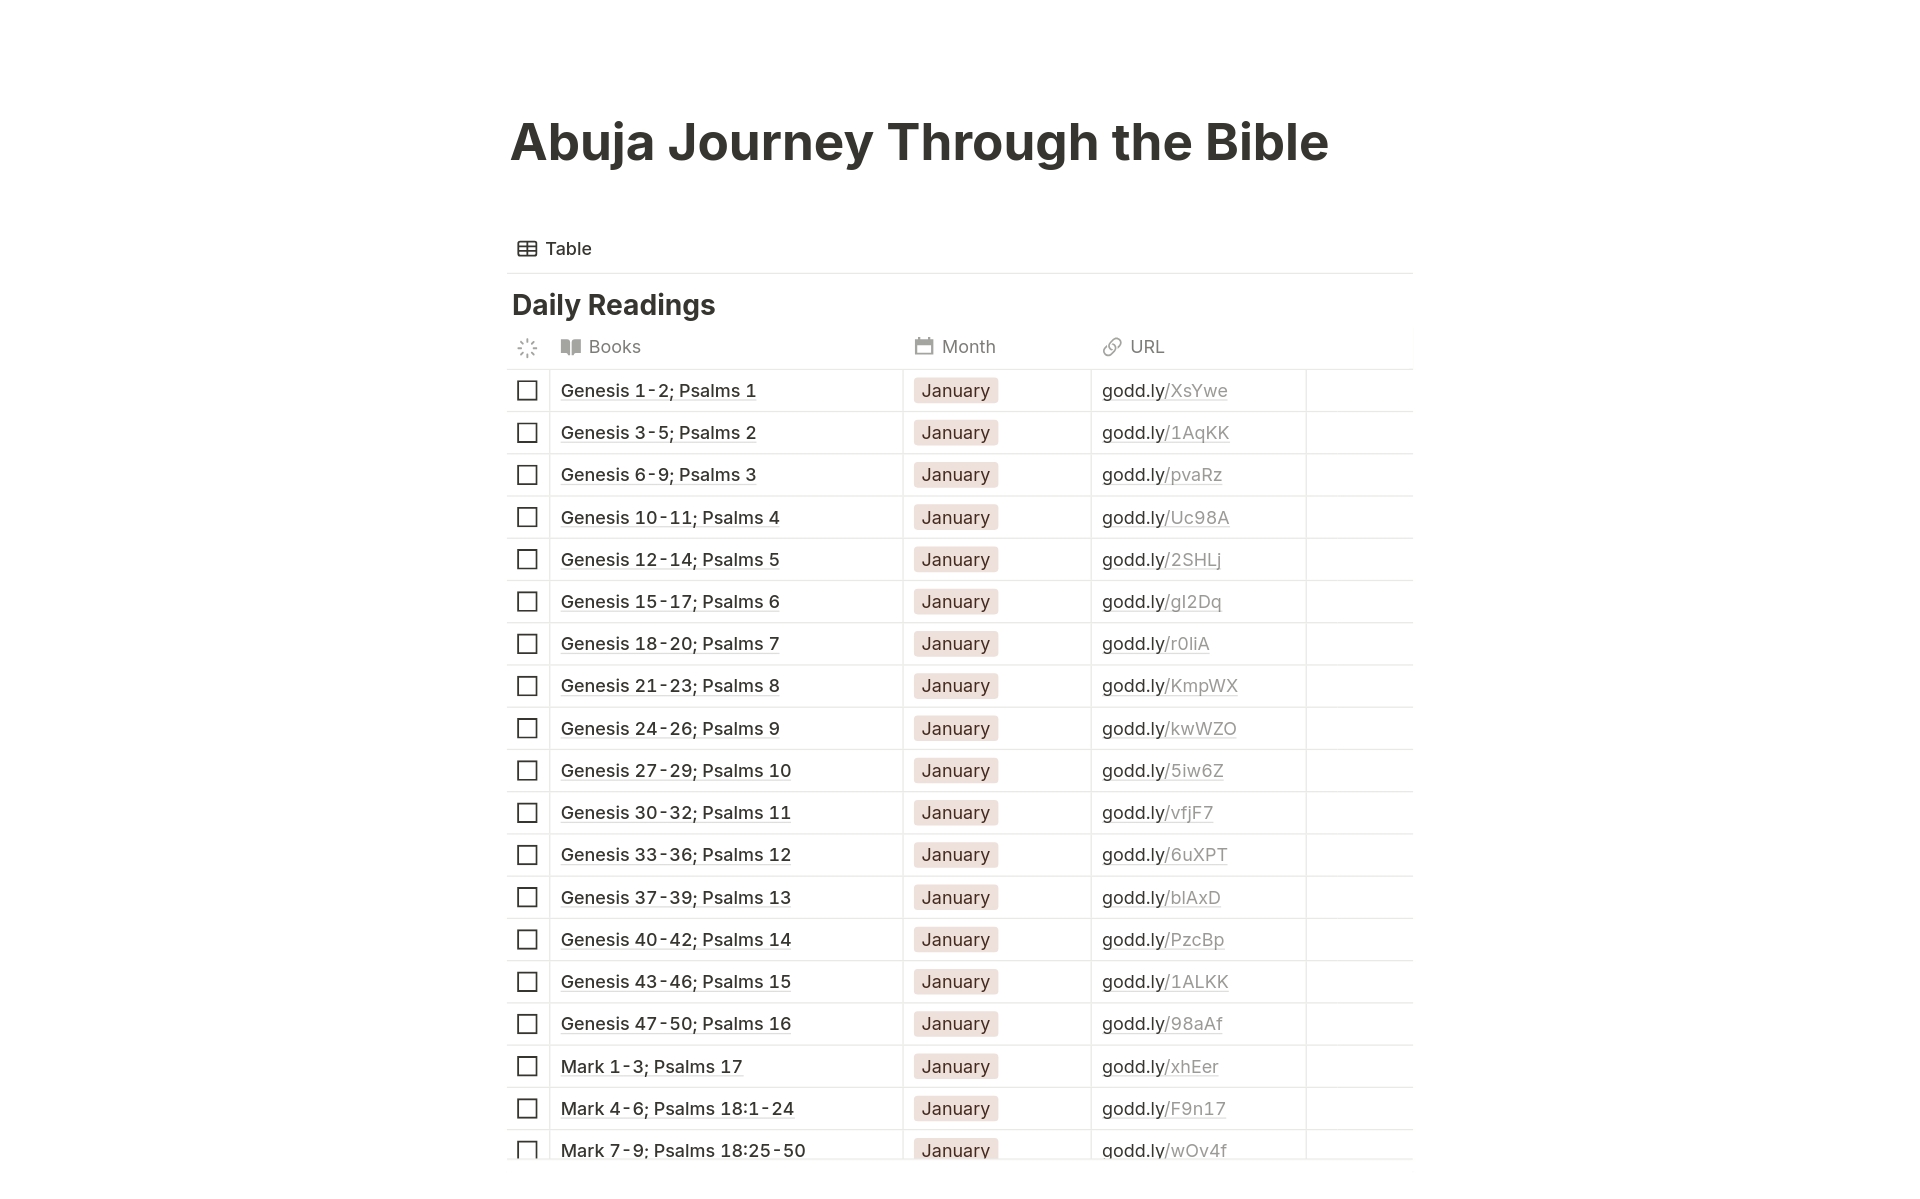 Explore the entire Bible in a year with the Abuja Journey Through the Bible template, designed to guide you through the Scriptures in a structured yet flexible way